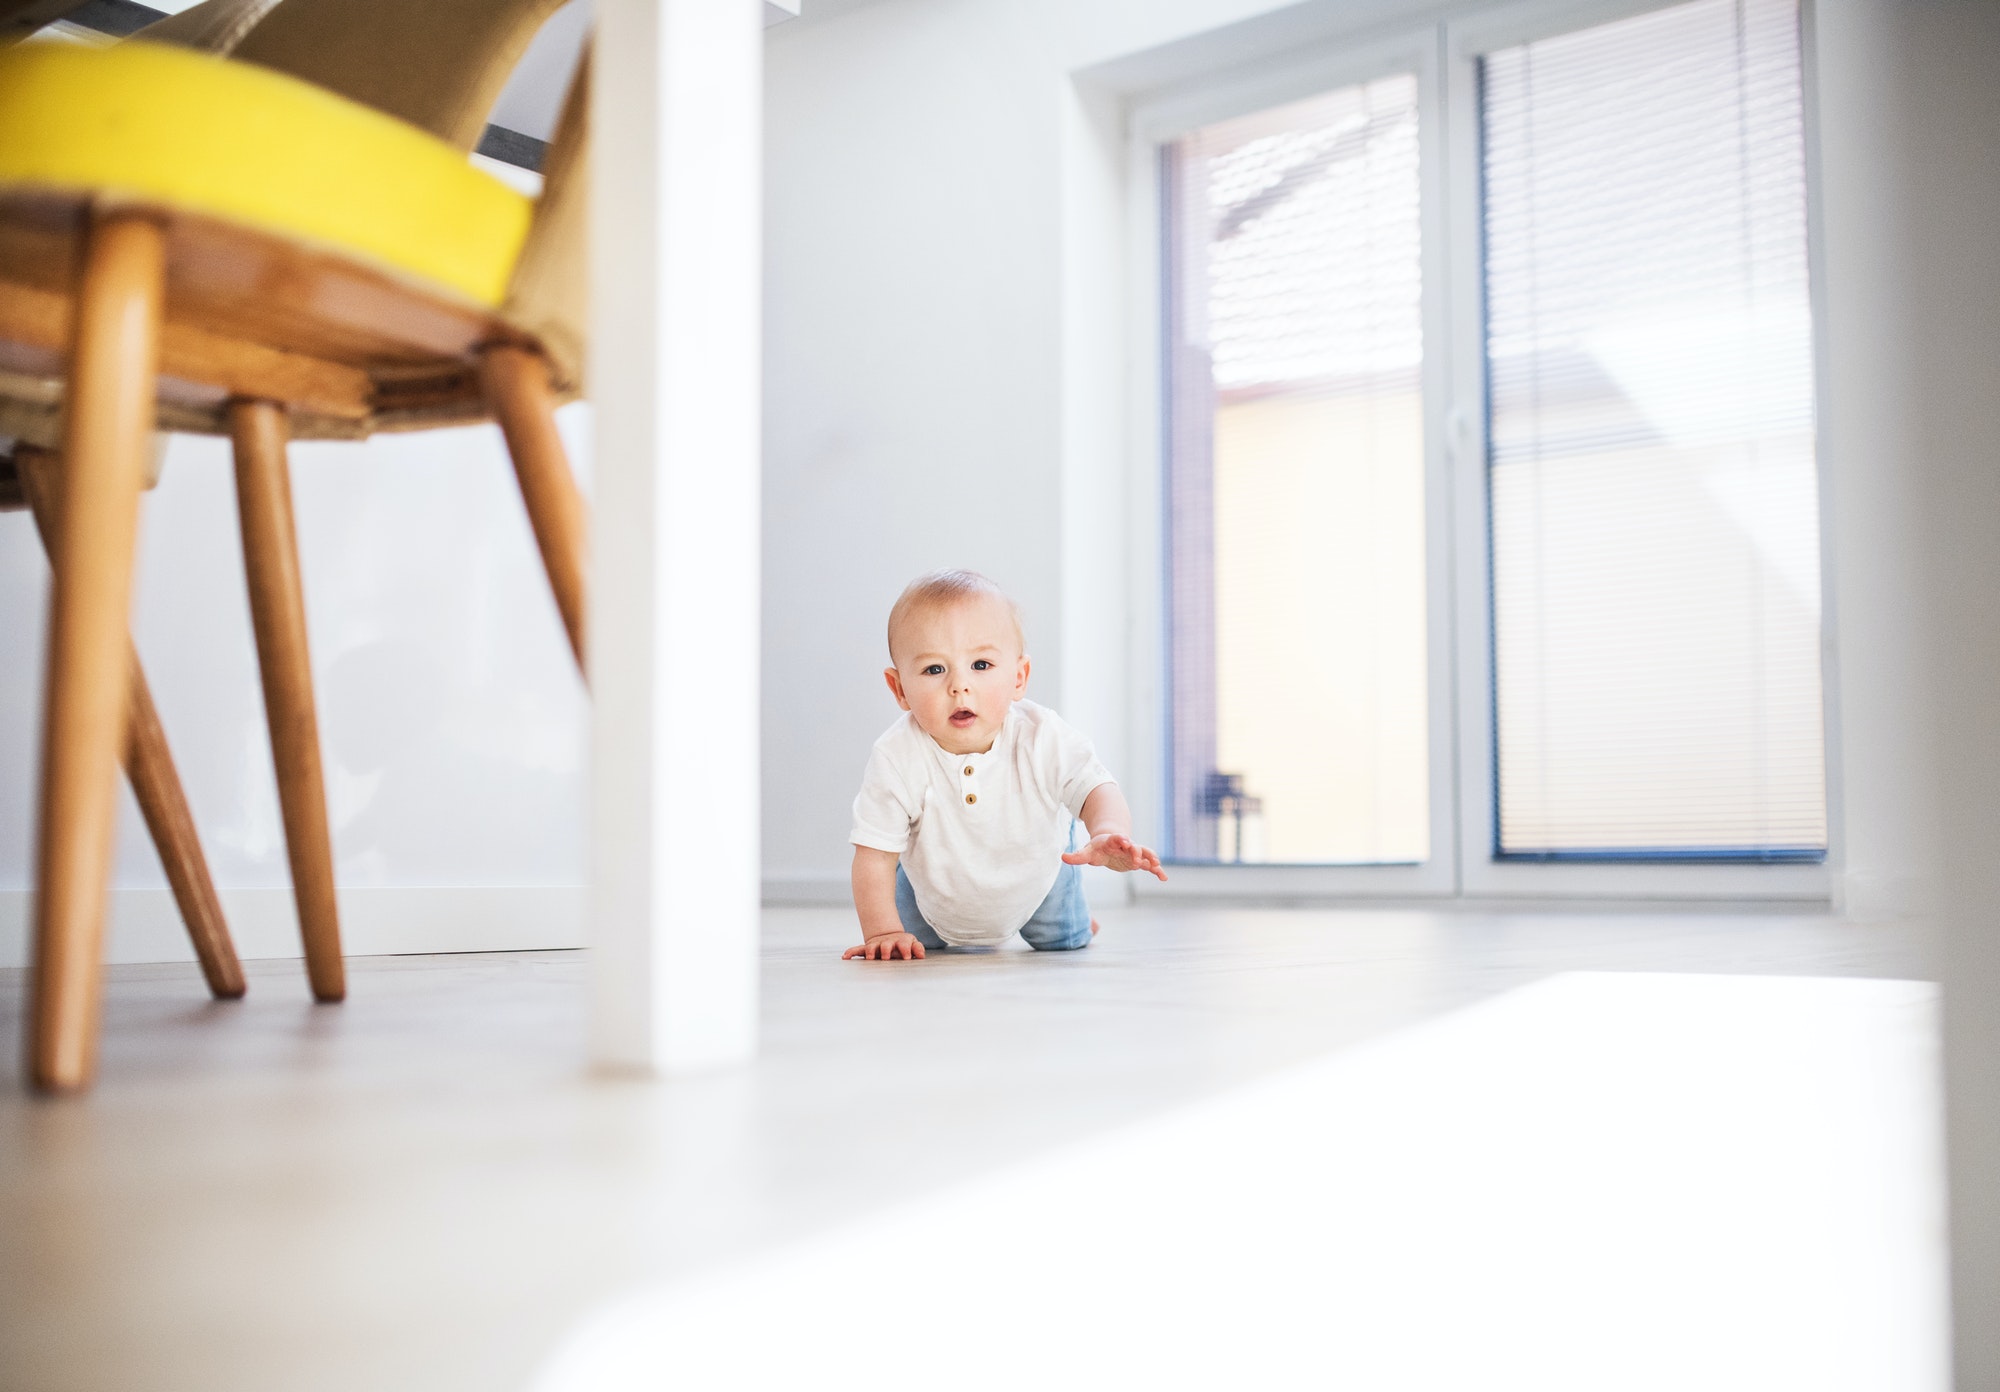 A baby boy crawling on the floor at home.